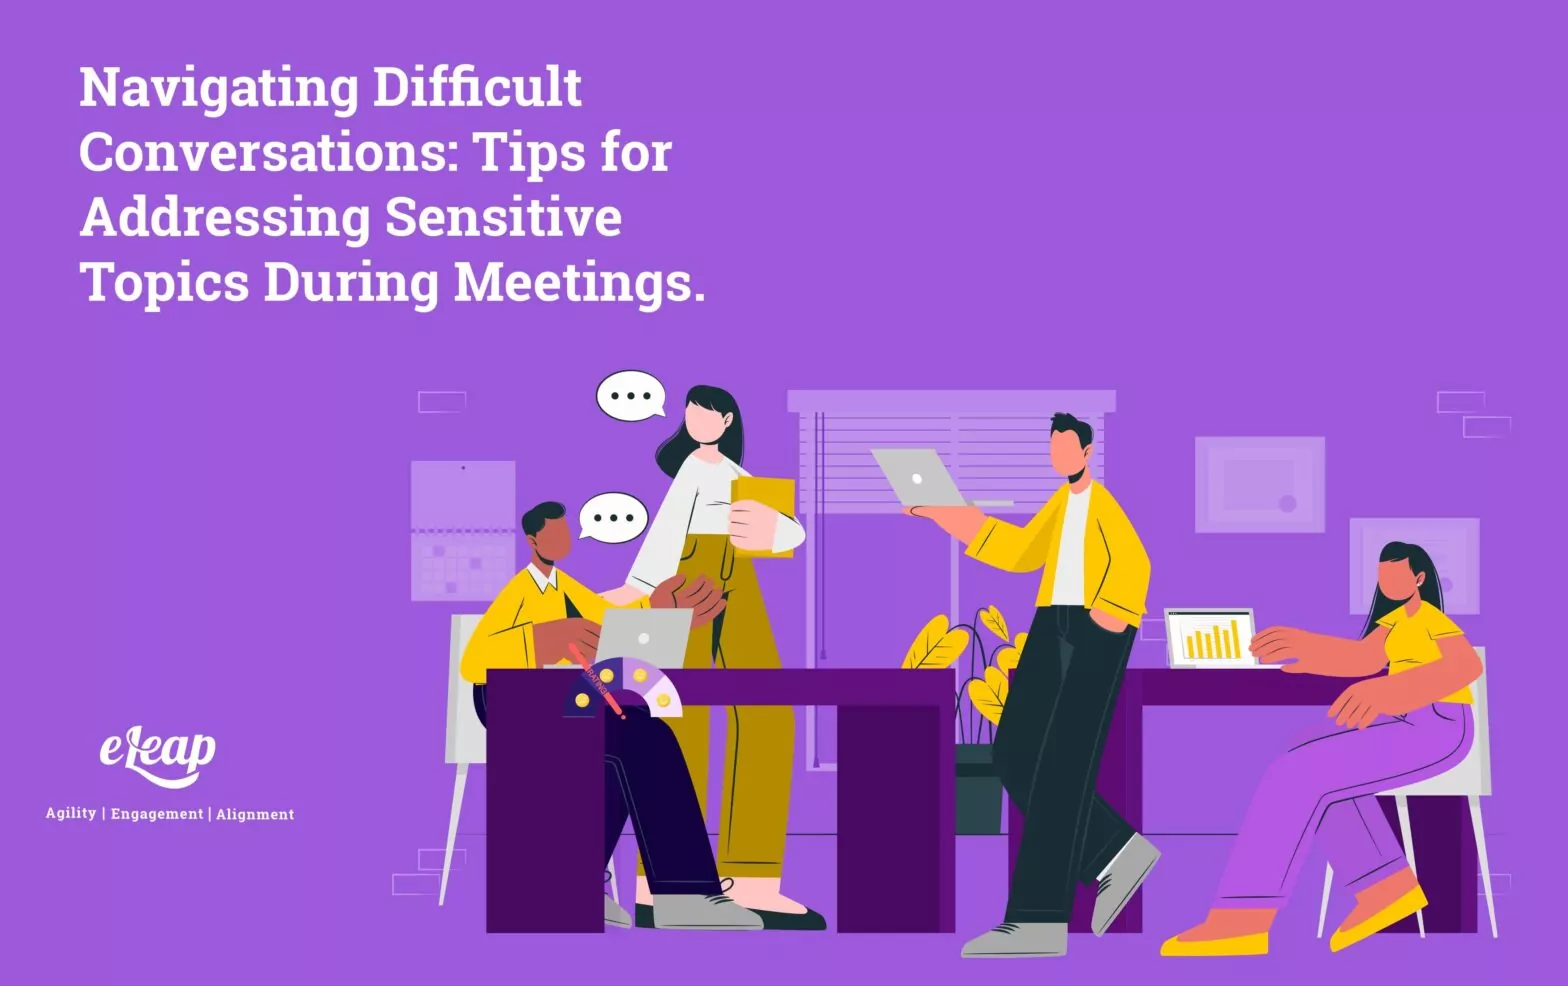 Navigating Difficult Conversations: Tips for Addressing Sensitive Topics During Meetings